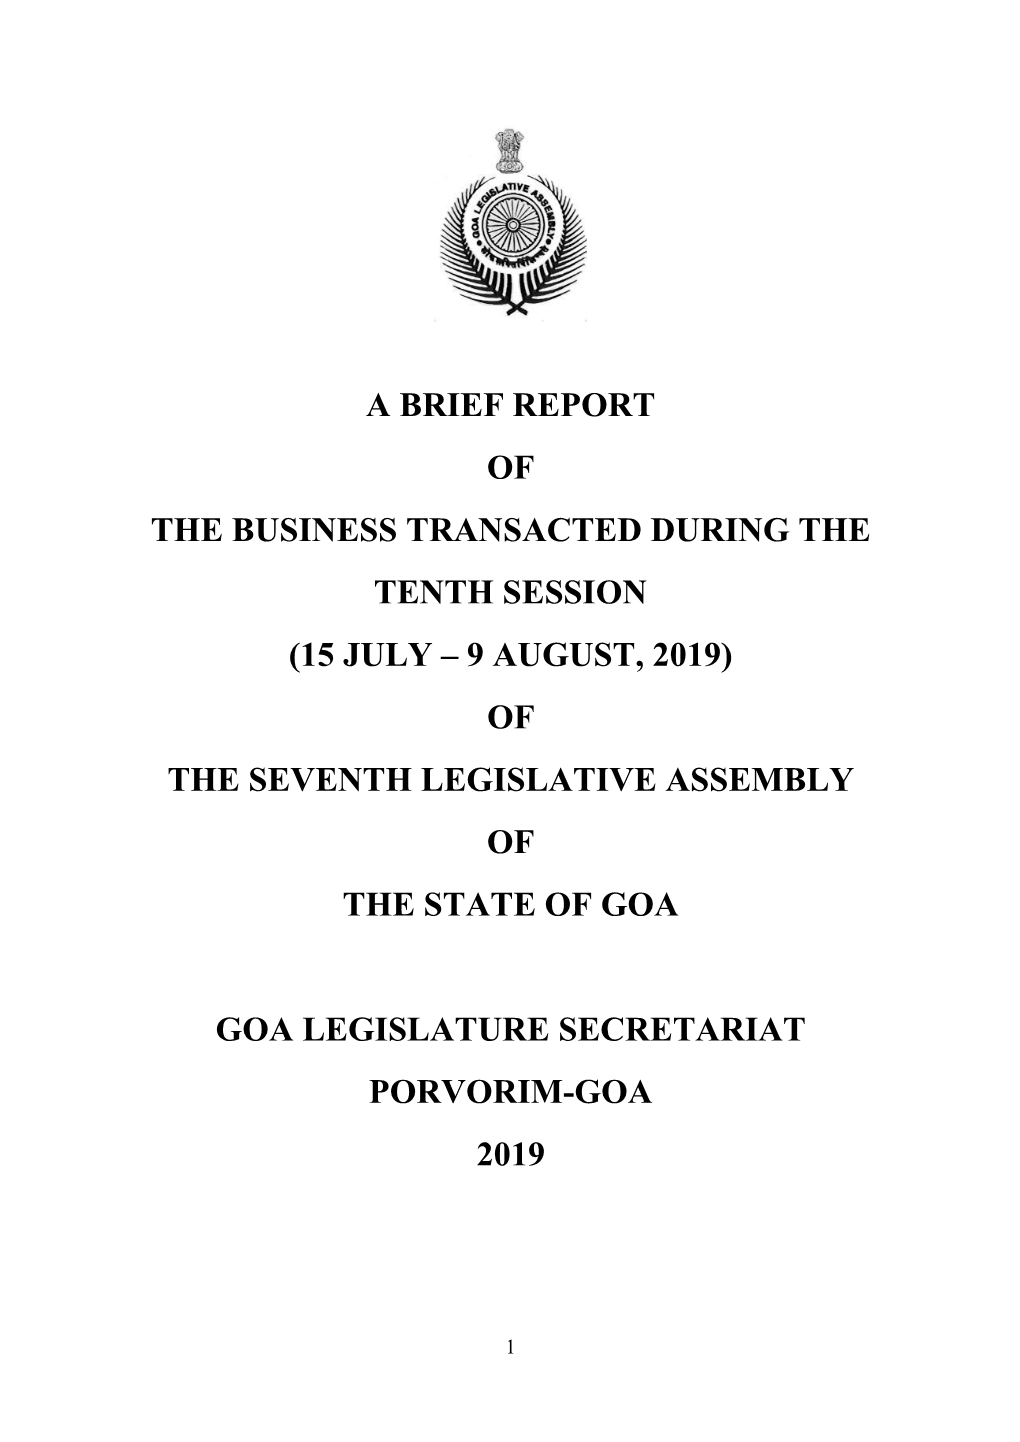 (15 July – 9 August, 2019) of the Seventh Legislative Assembly of the State of Goa